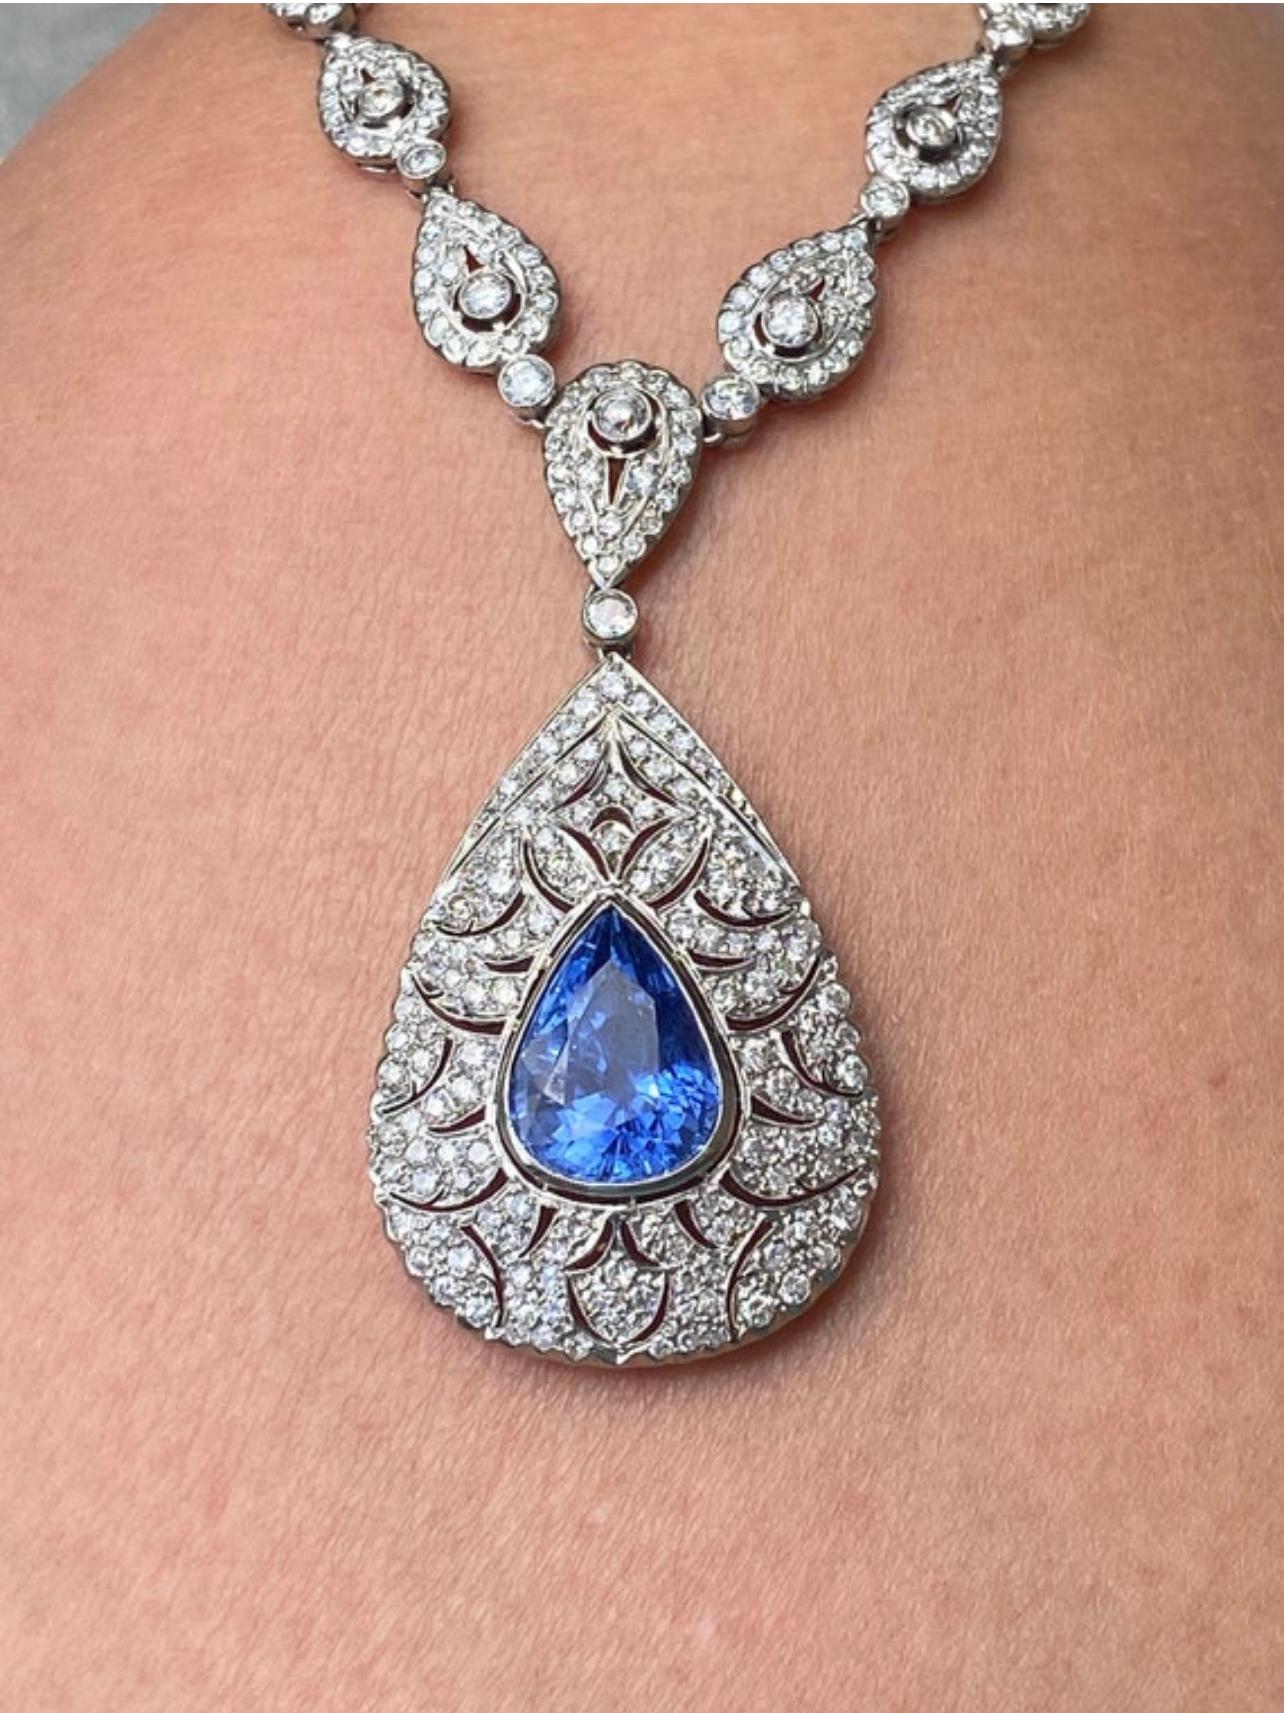 A necklace to truly stop the room! This necklace is an absolute dream. Featuring a magnificent 11.28ct pear shaped center sapphire, this necklace will be the envy of all. The center sapphire is accompanied by GIA report 2223137465 stating the center